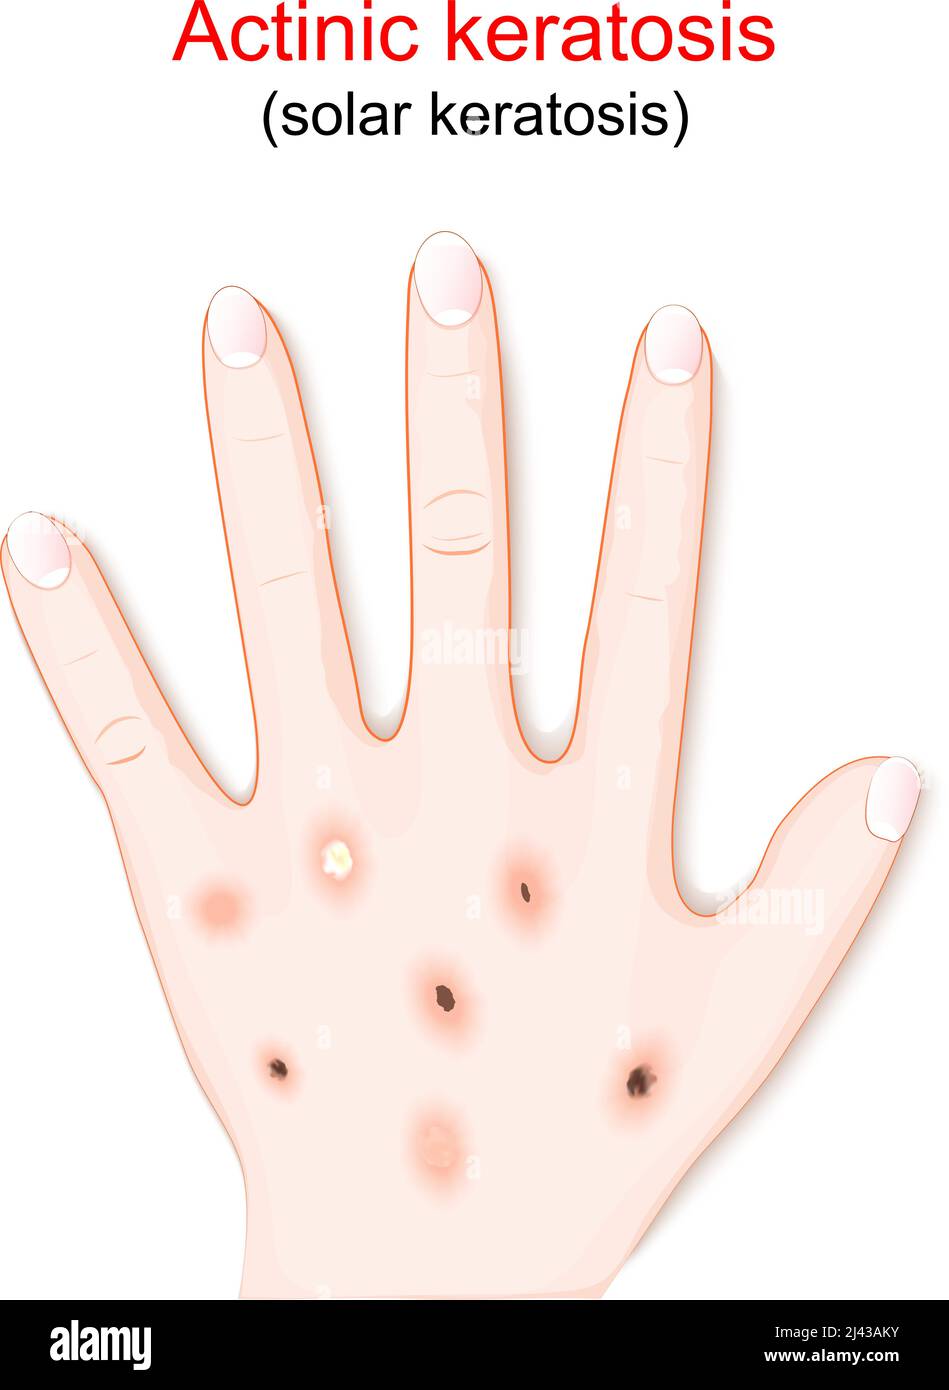 Actinic keratosis are dry scaly patches of skin that have been damaged by the sun. humans hand with solar keratosis. vector illustration Stock Vector